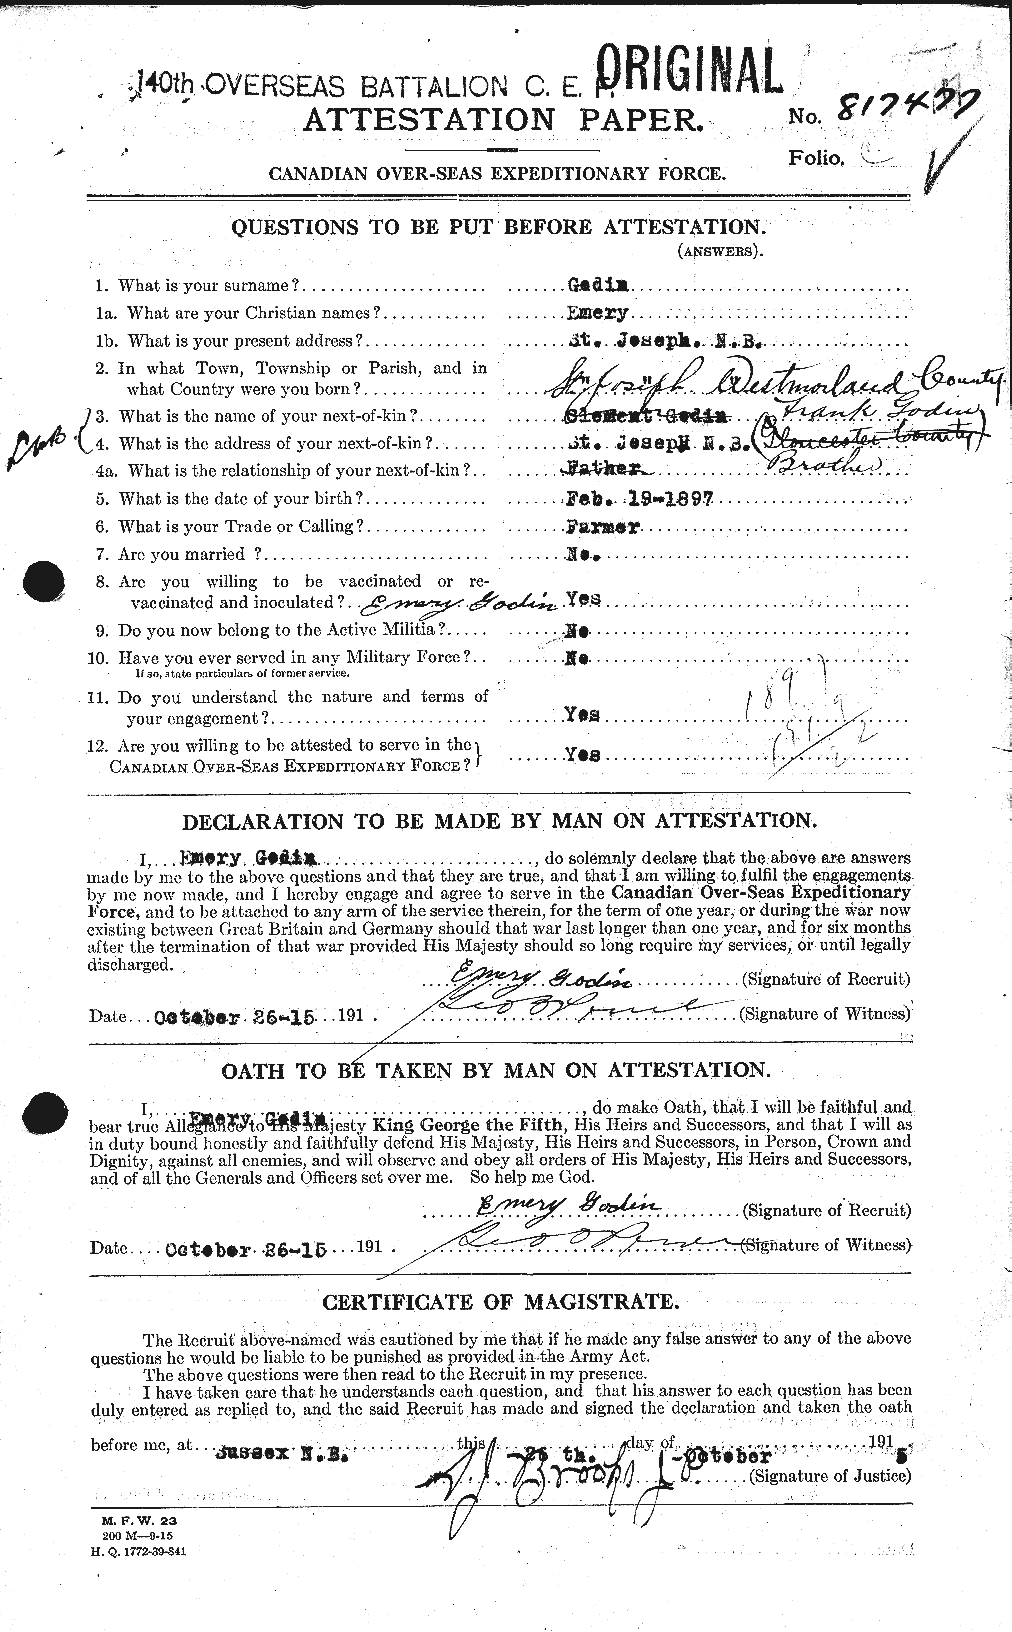 Personnel Records of the First World War - CEF 354511a